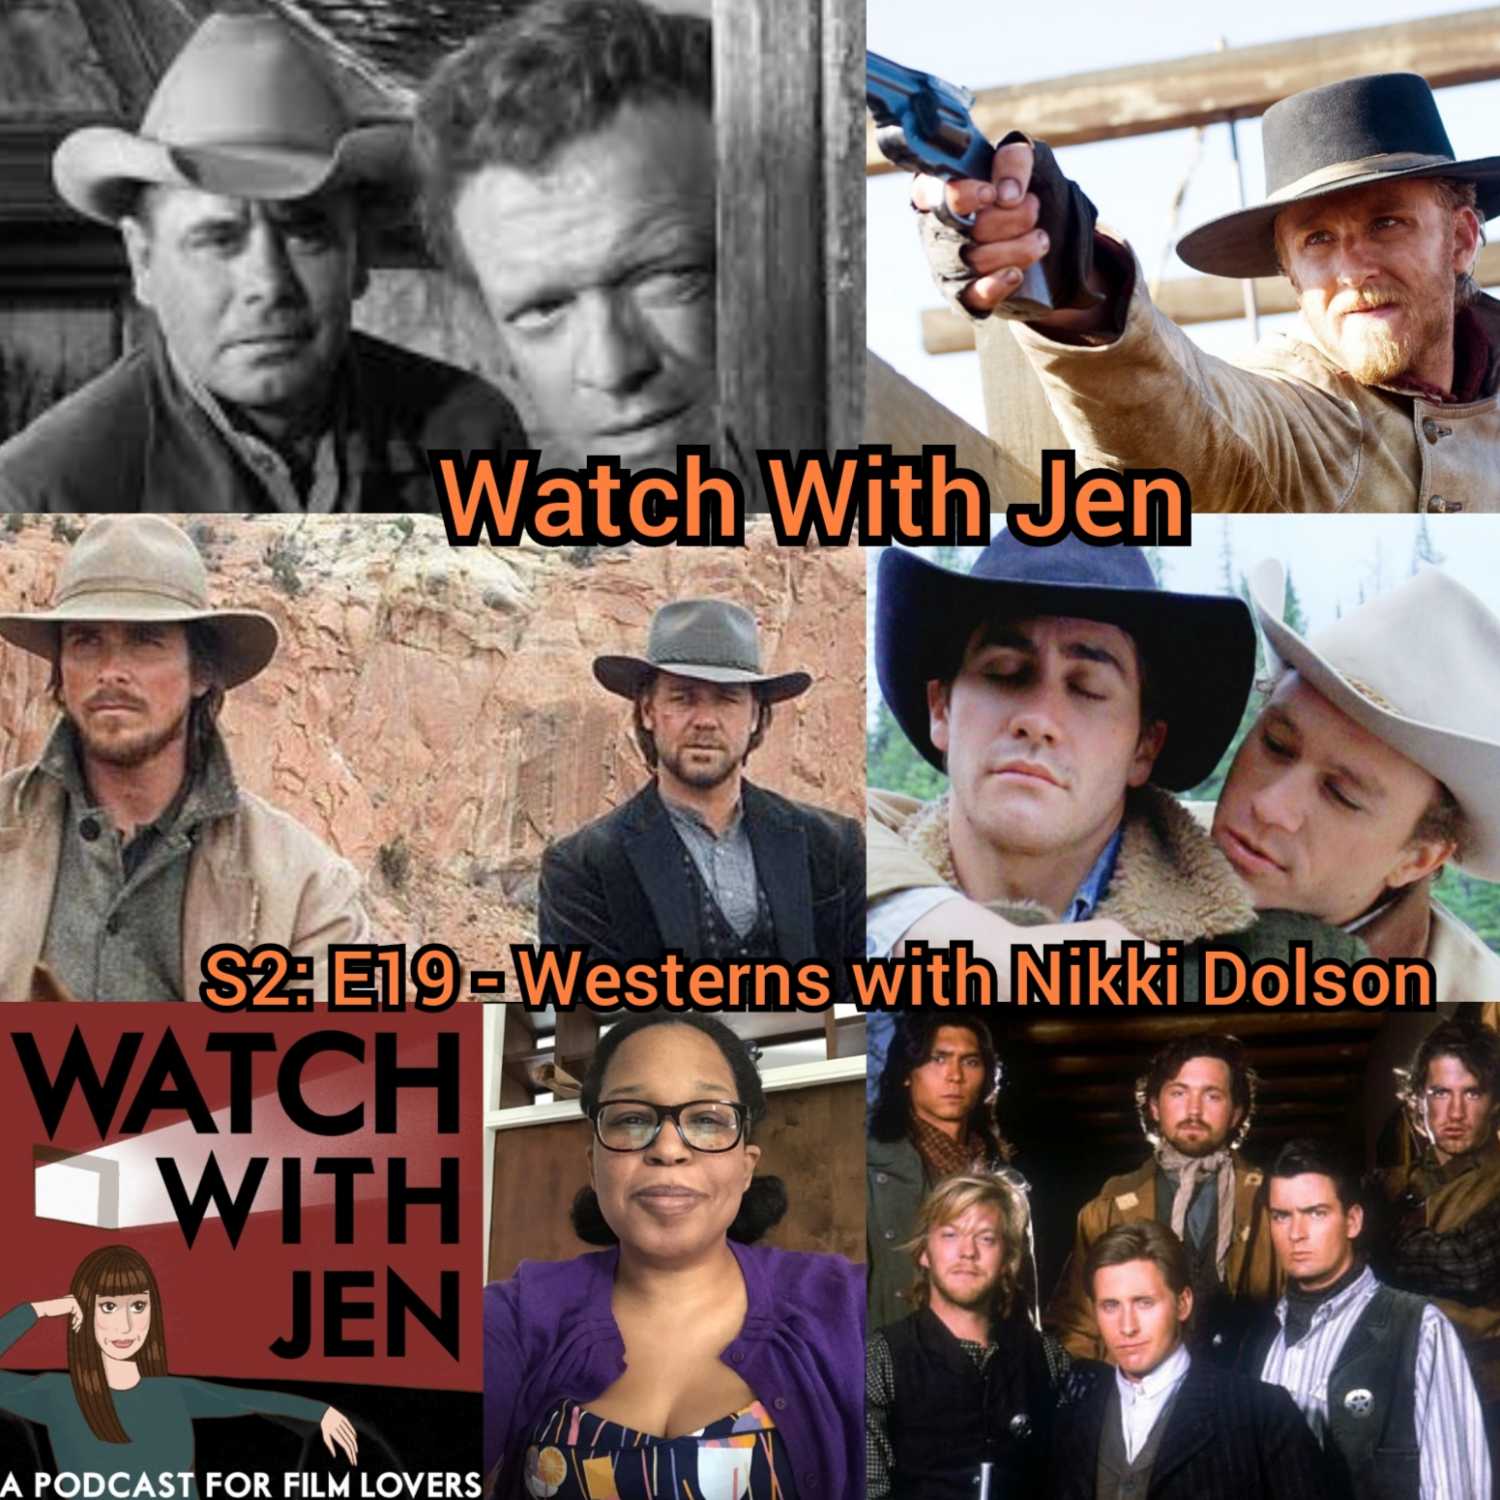 Watch With Jen - S2: E19 - Westerns with Nikki Dolson